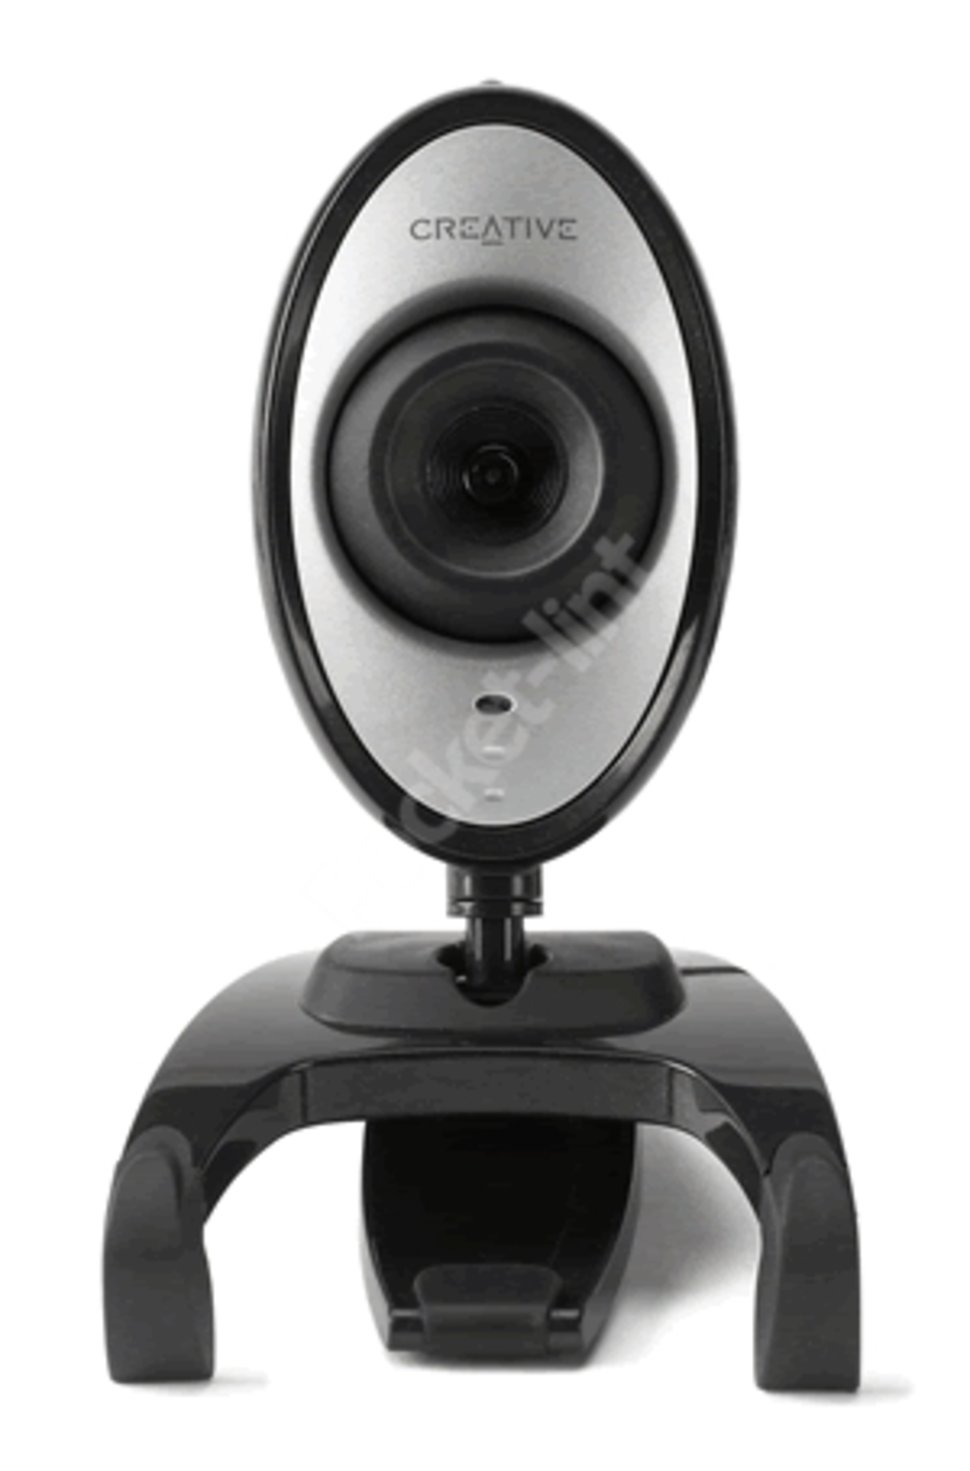 driver for creative webcam pd1030